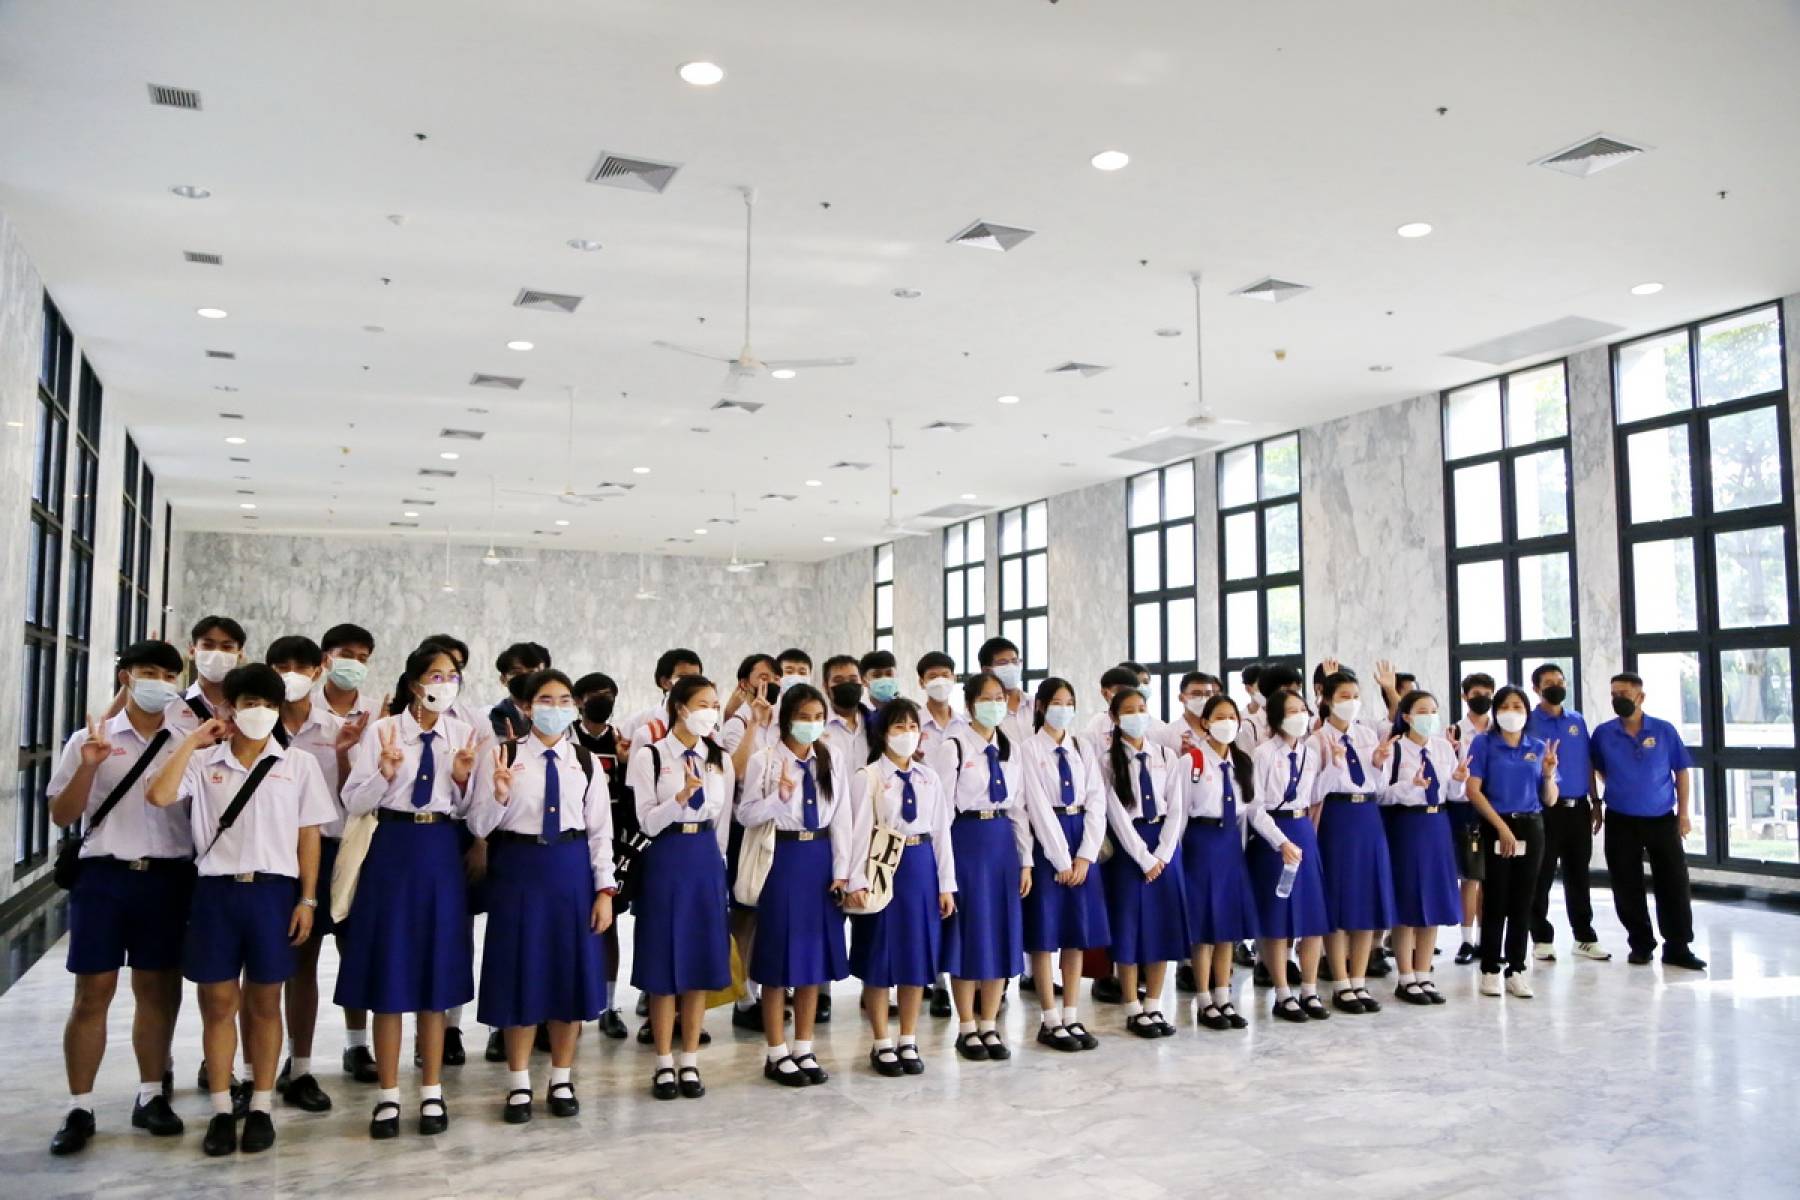 A Group of Students from Assumption College Rayong Visited Assumption University